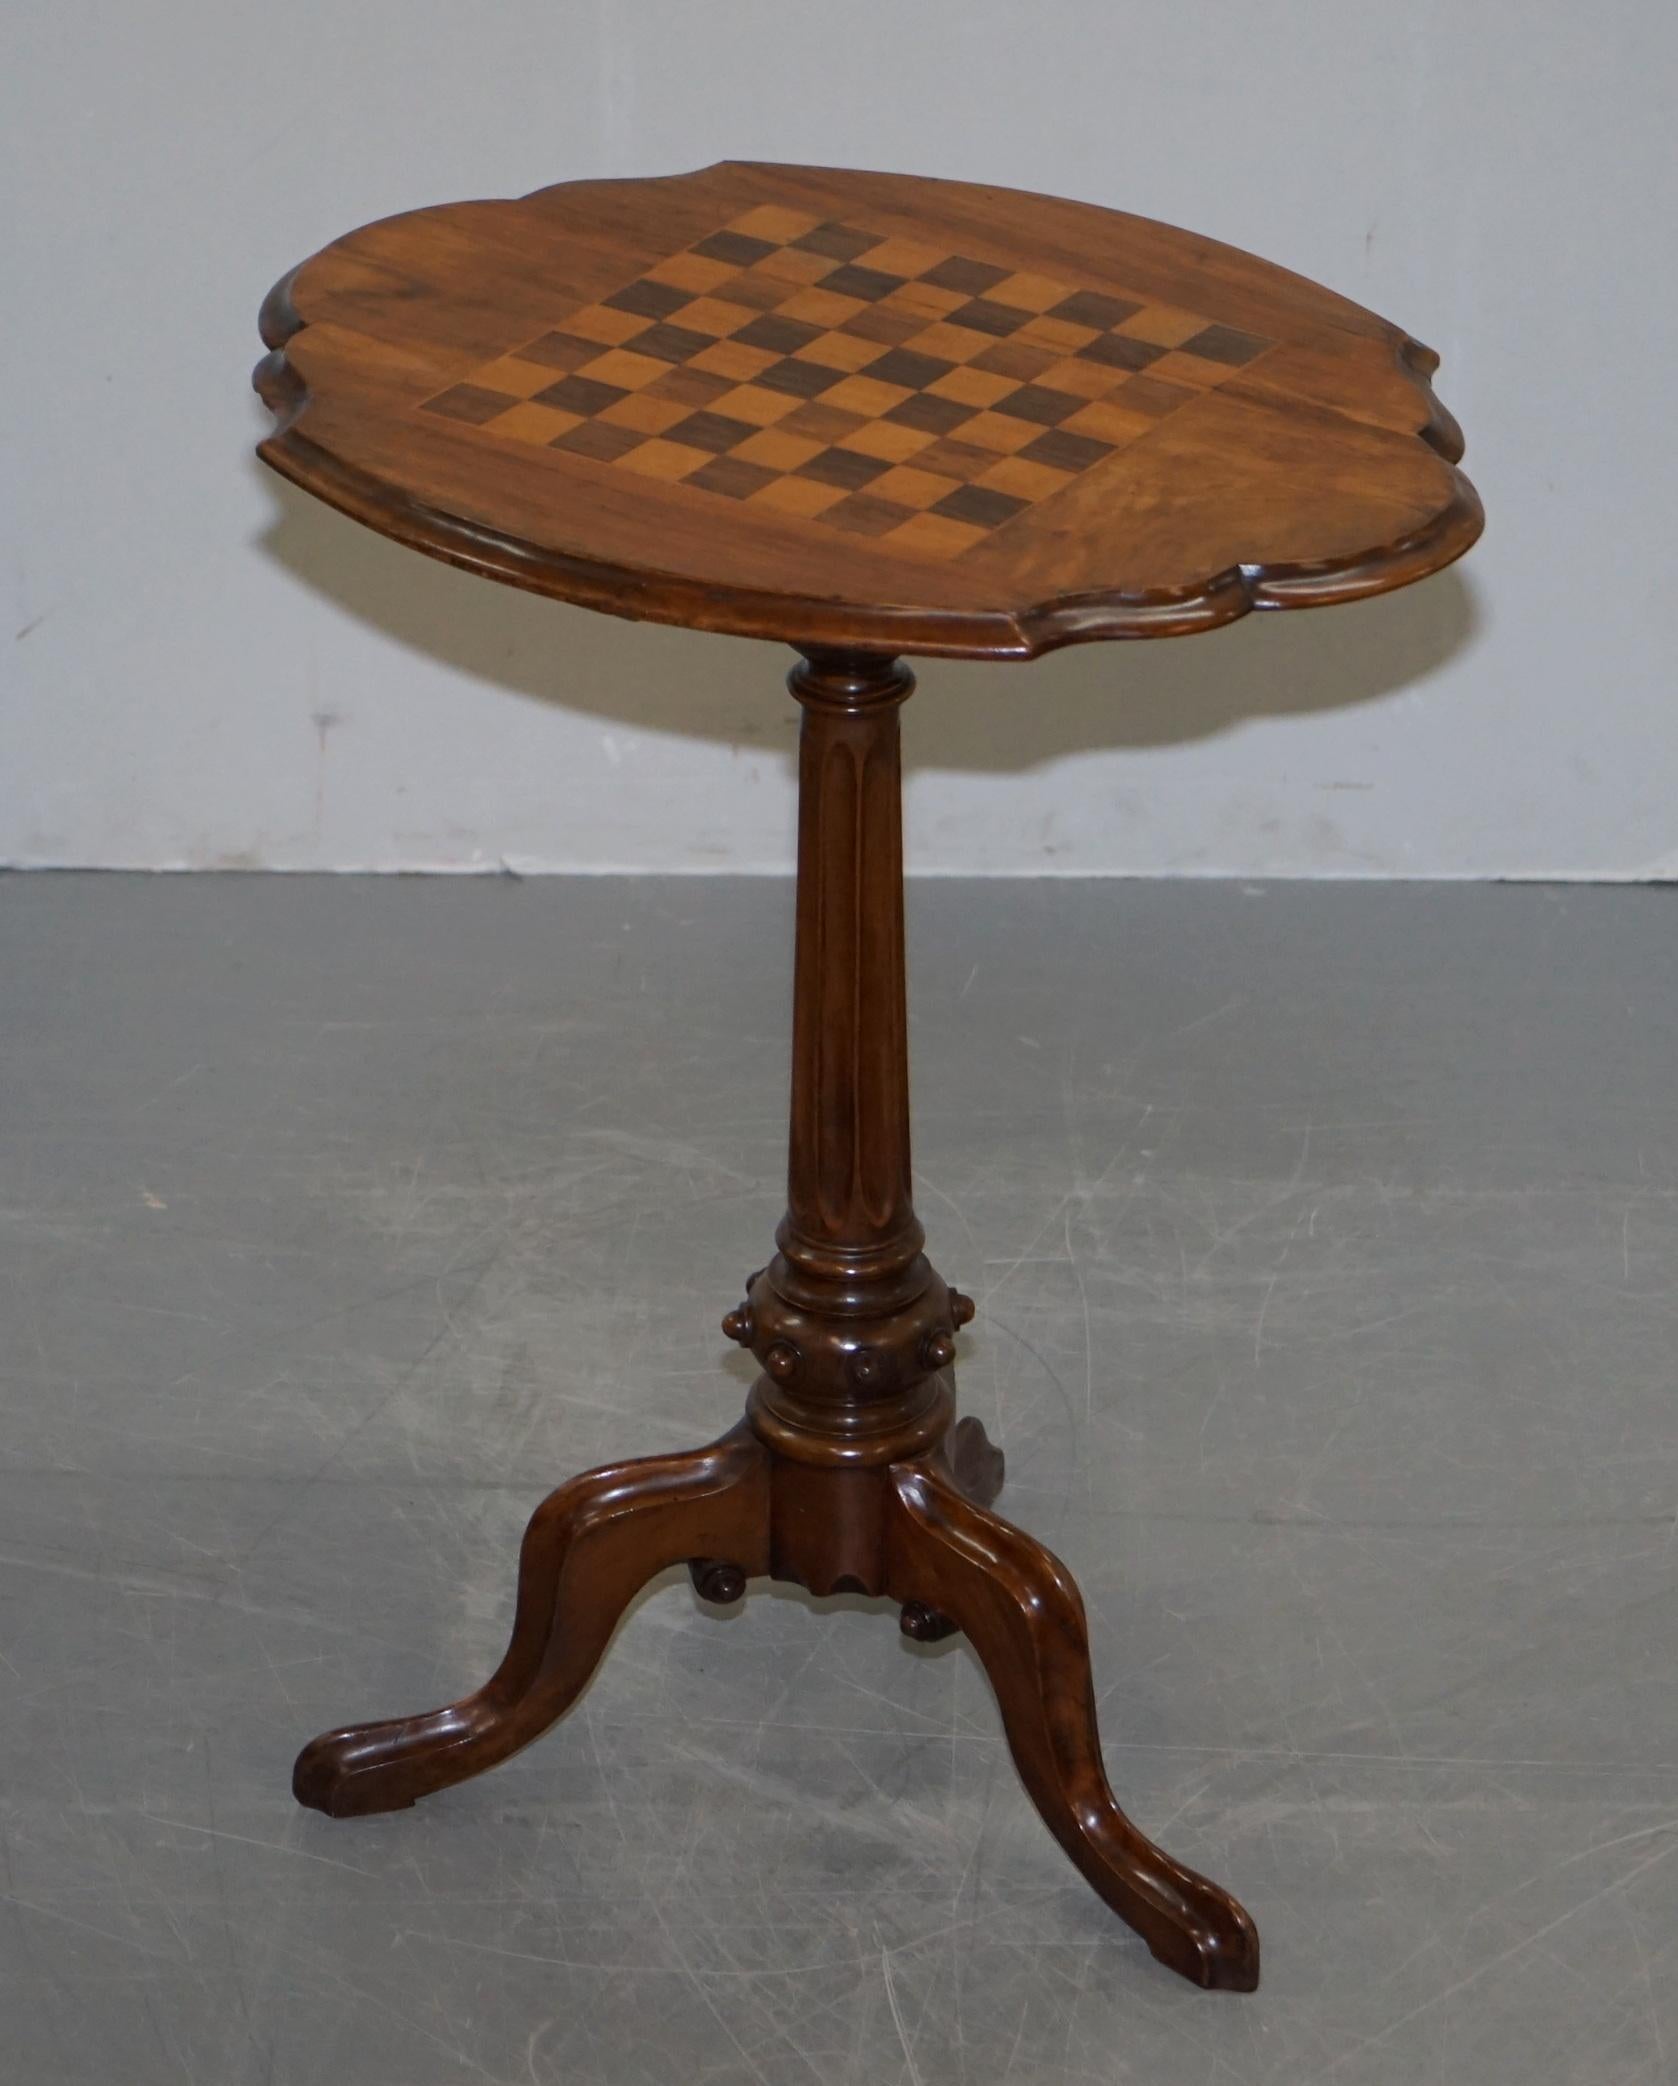 High Victorian Victorian 1880 Walnut & Hardwood Marquetry Inlaid Chess Games Table Ornate Legs For Sale